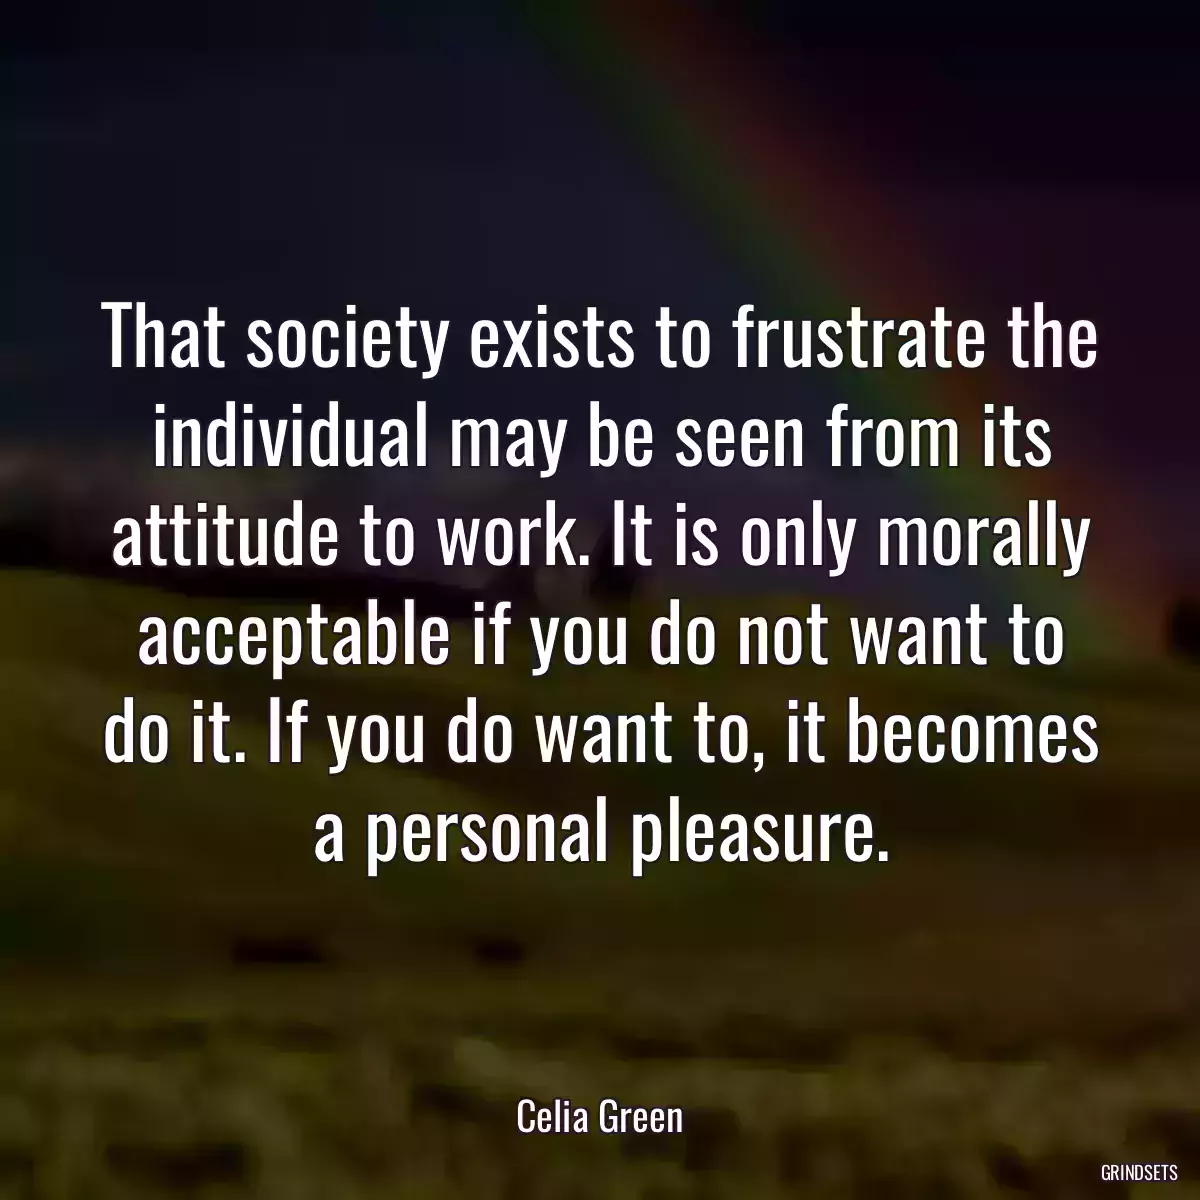 That society exists to frustrate the individual may be seen from its attitude to work. It is only morally acceptable if you do not want to do it. If you do want to, it becomes a personal pleasure.